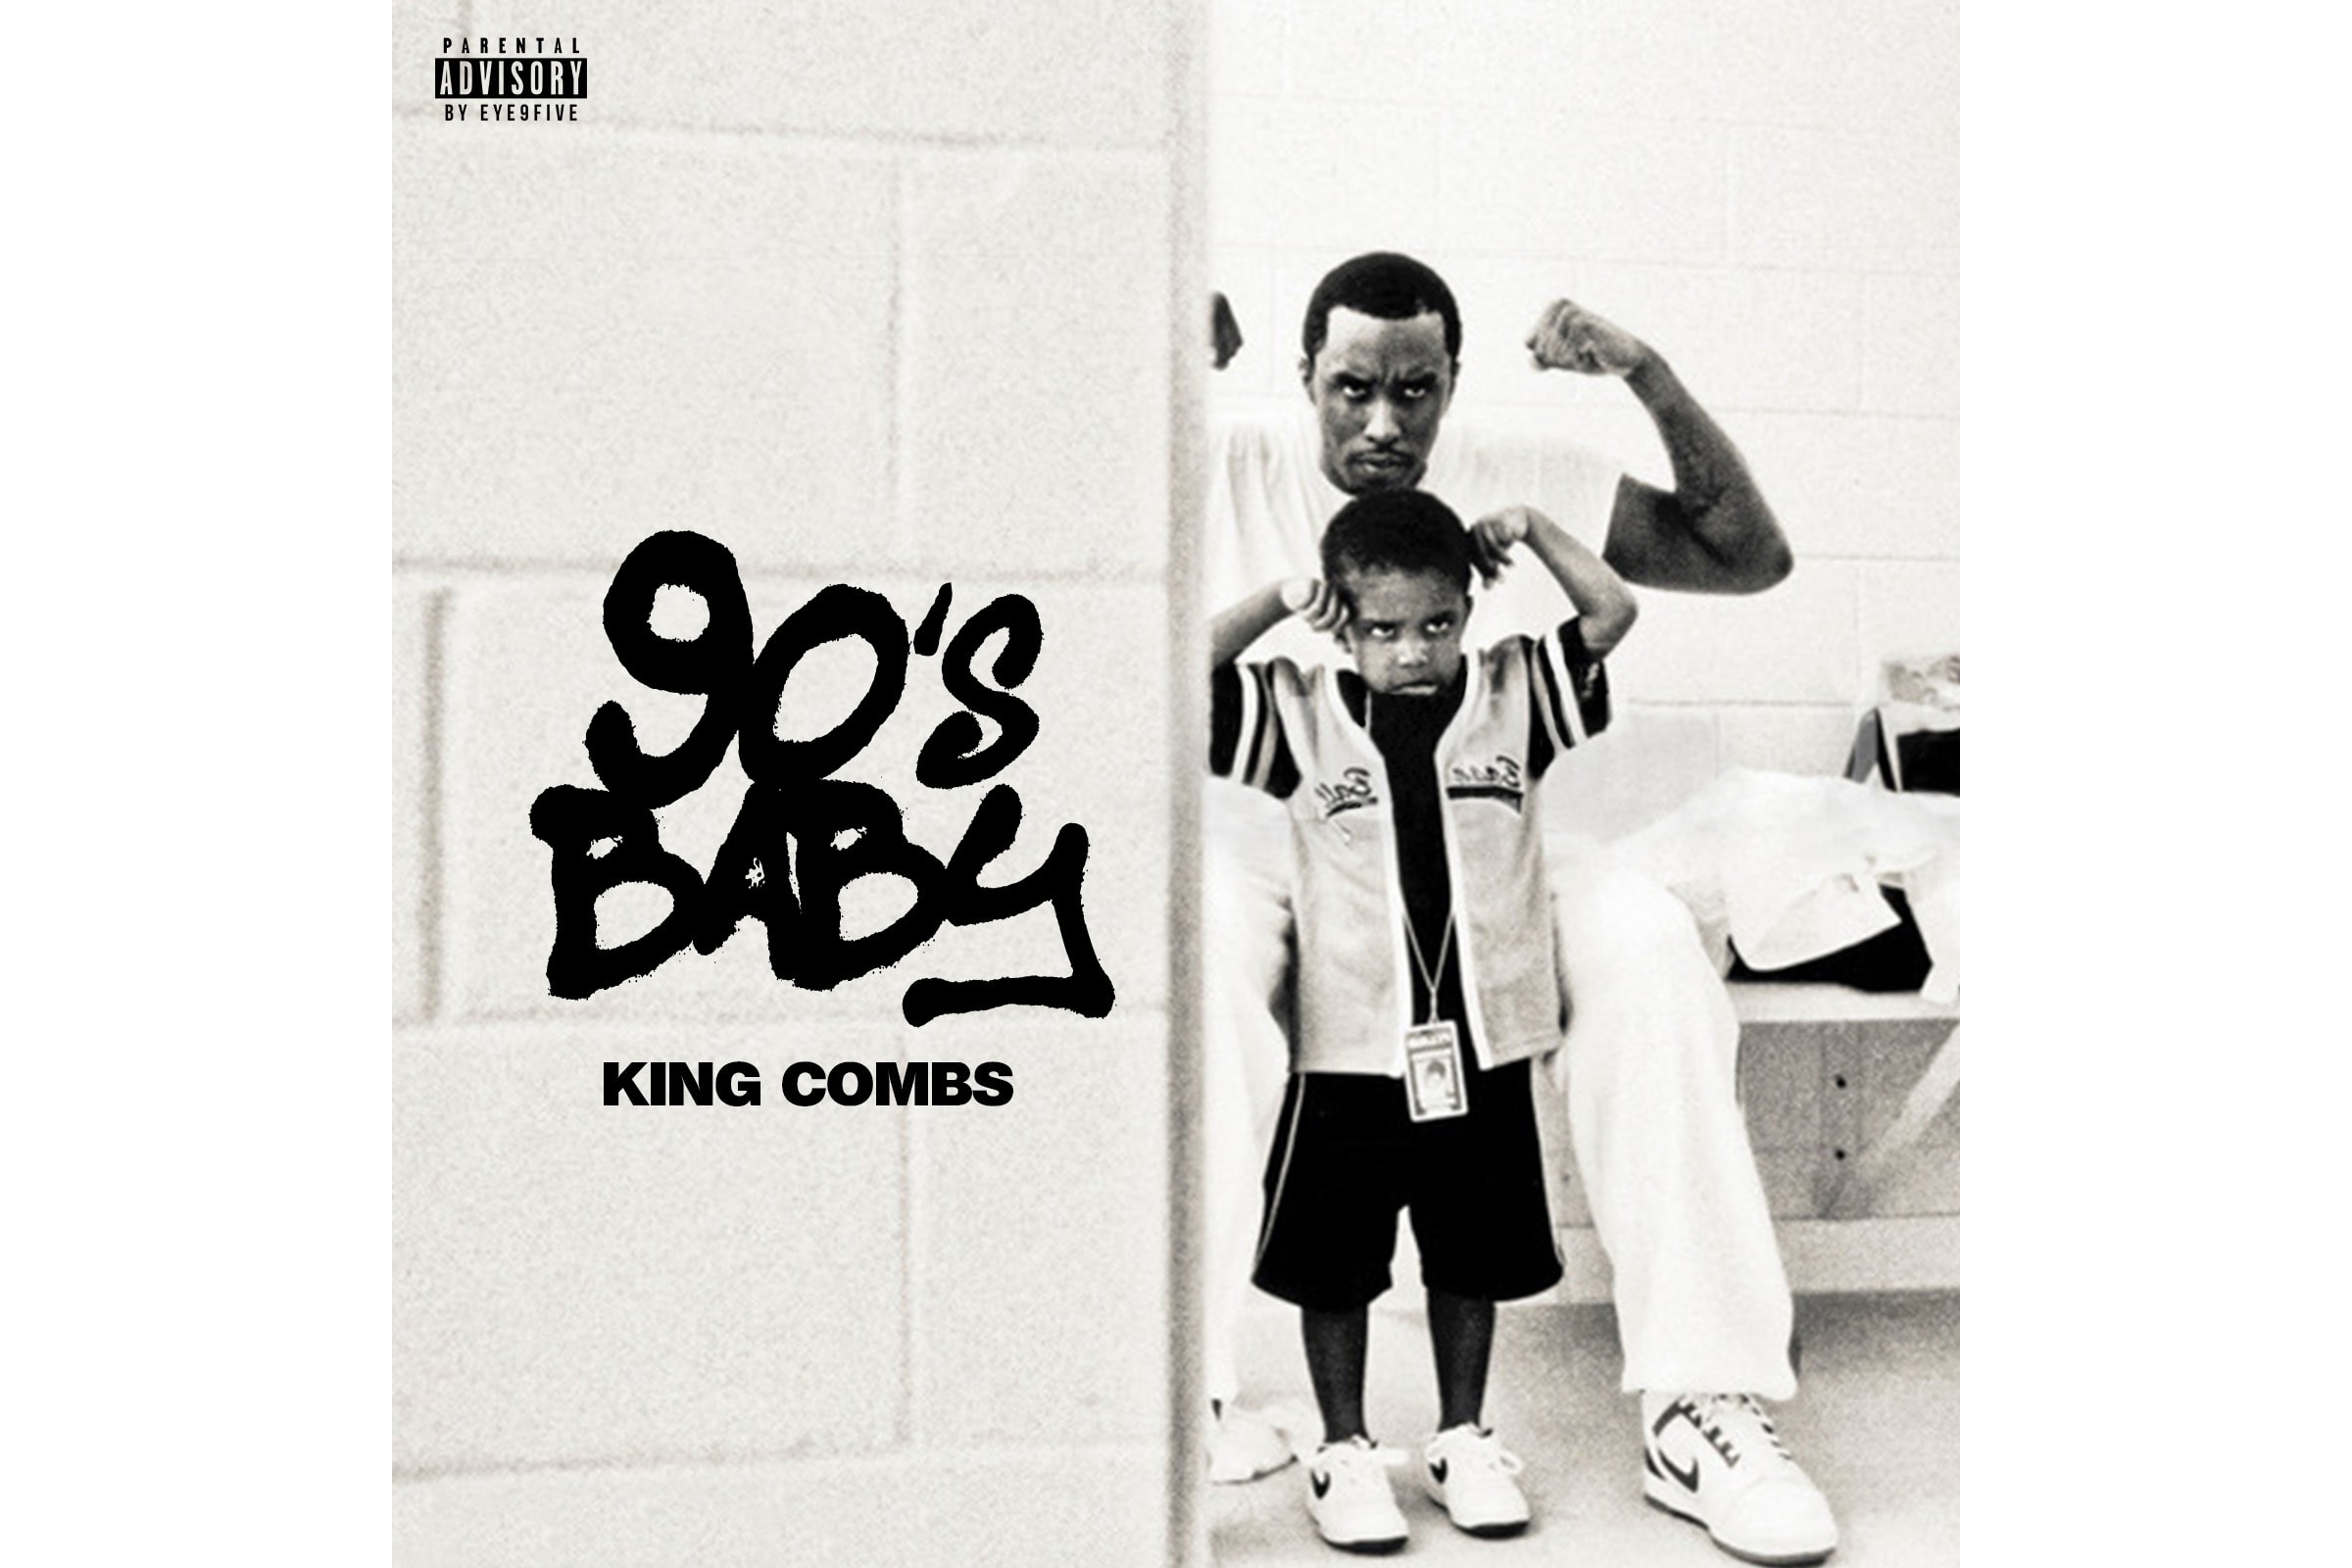 King Combs 90's Baby Mixtape Puff Daddy Diddy son CYN 90s bad boy records rapper musician artist Christian sean puffy